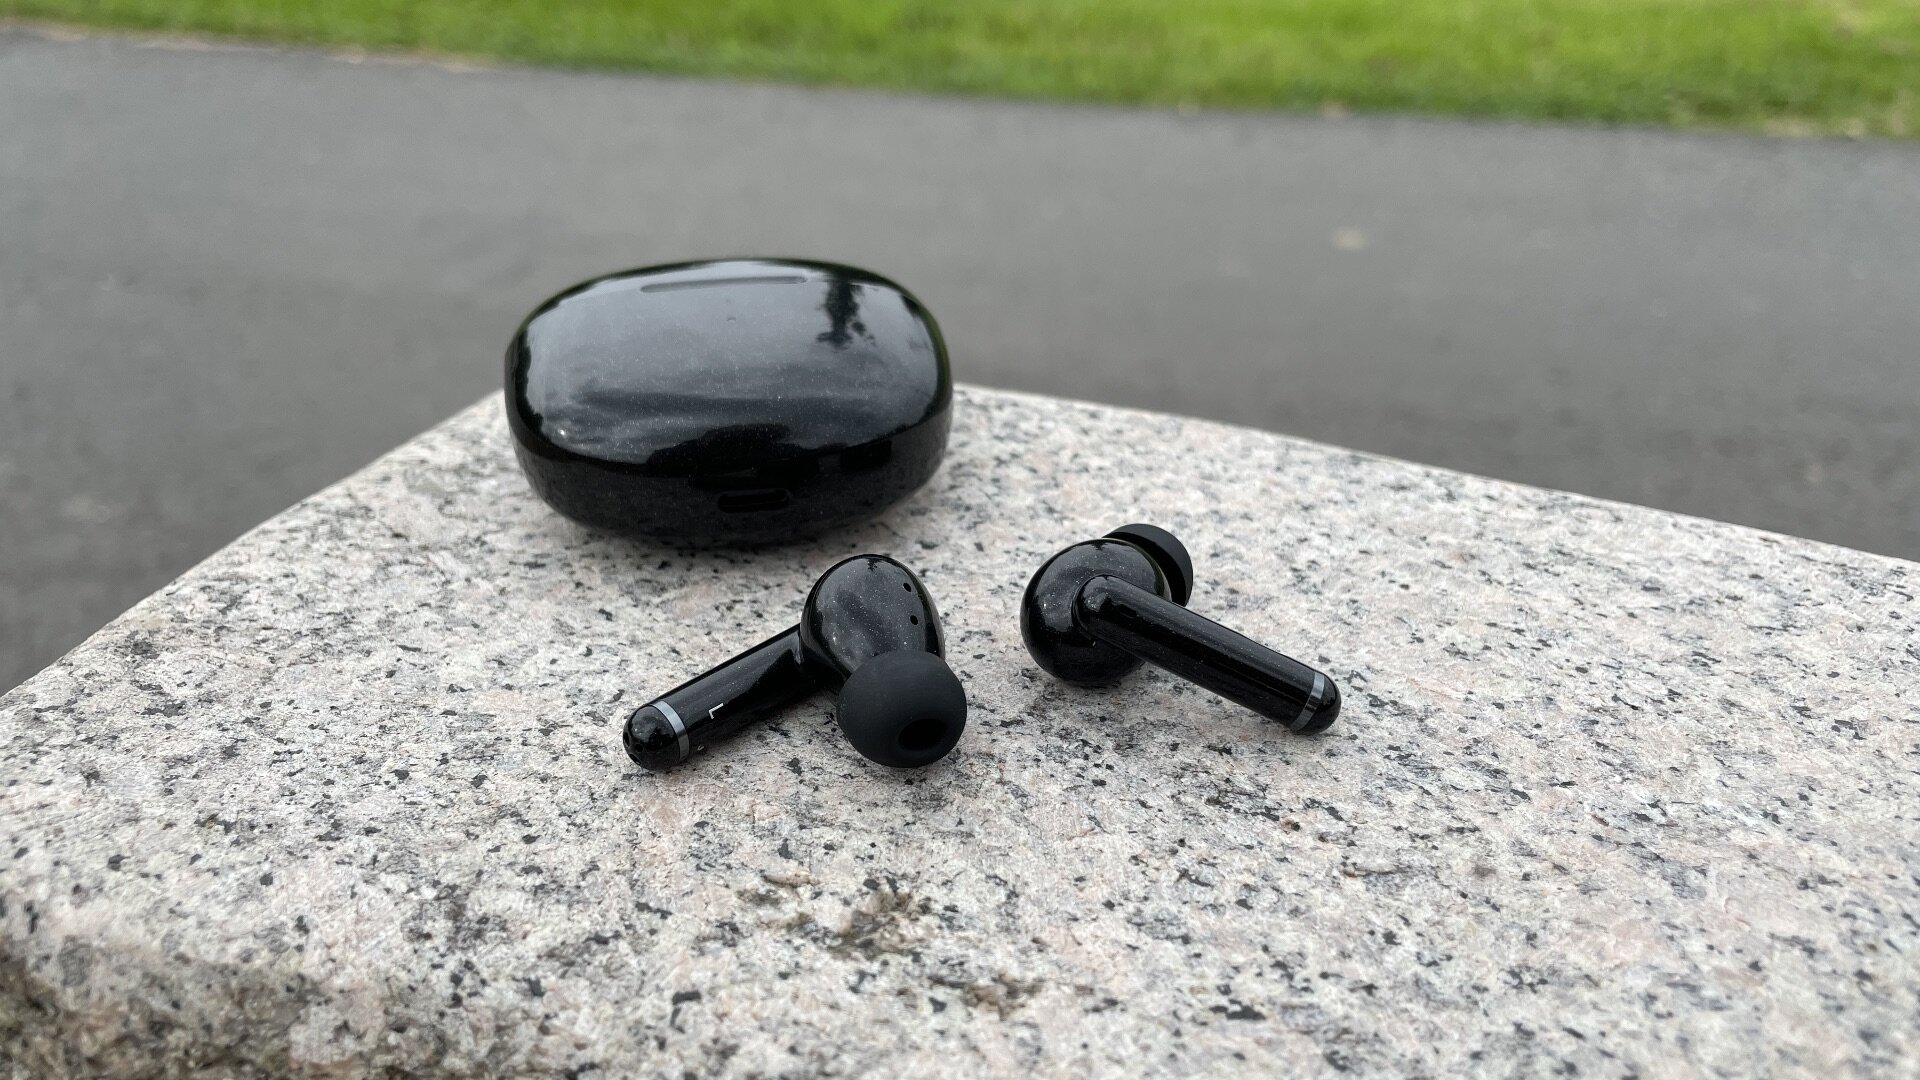 QCY HT03 ANC earbuds review.jpg